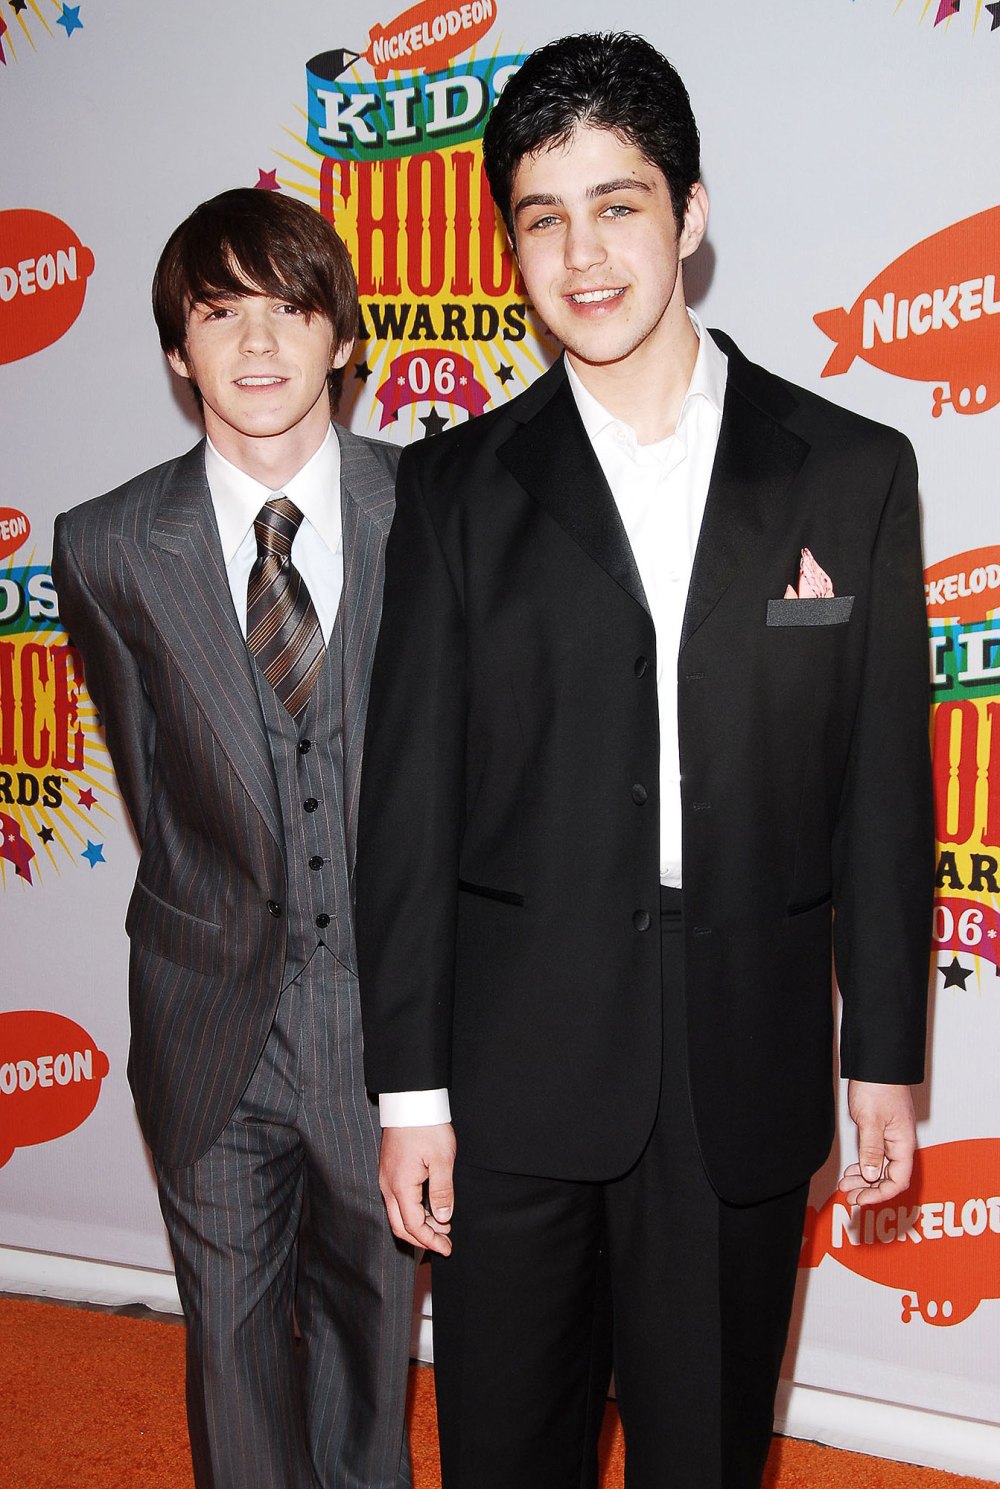 Drake Bell Says He Talks to Josh Peck ‘All the Time’ and Has ‘No Hard Feelings’ Over Wedding Snub